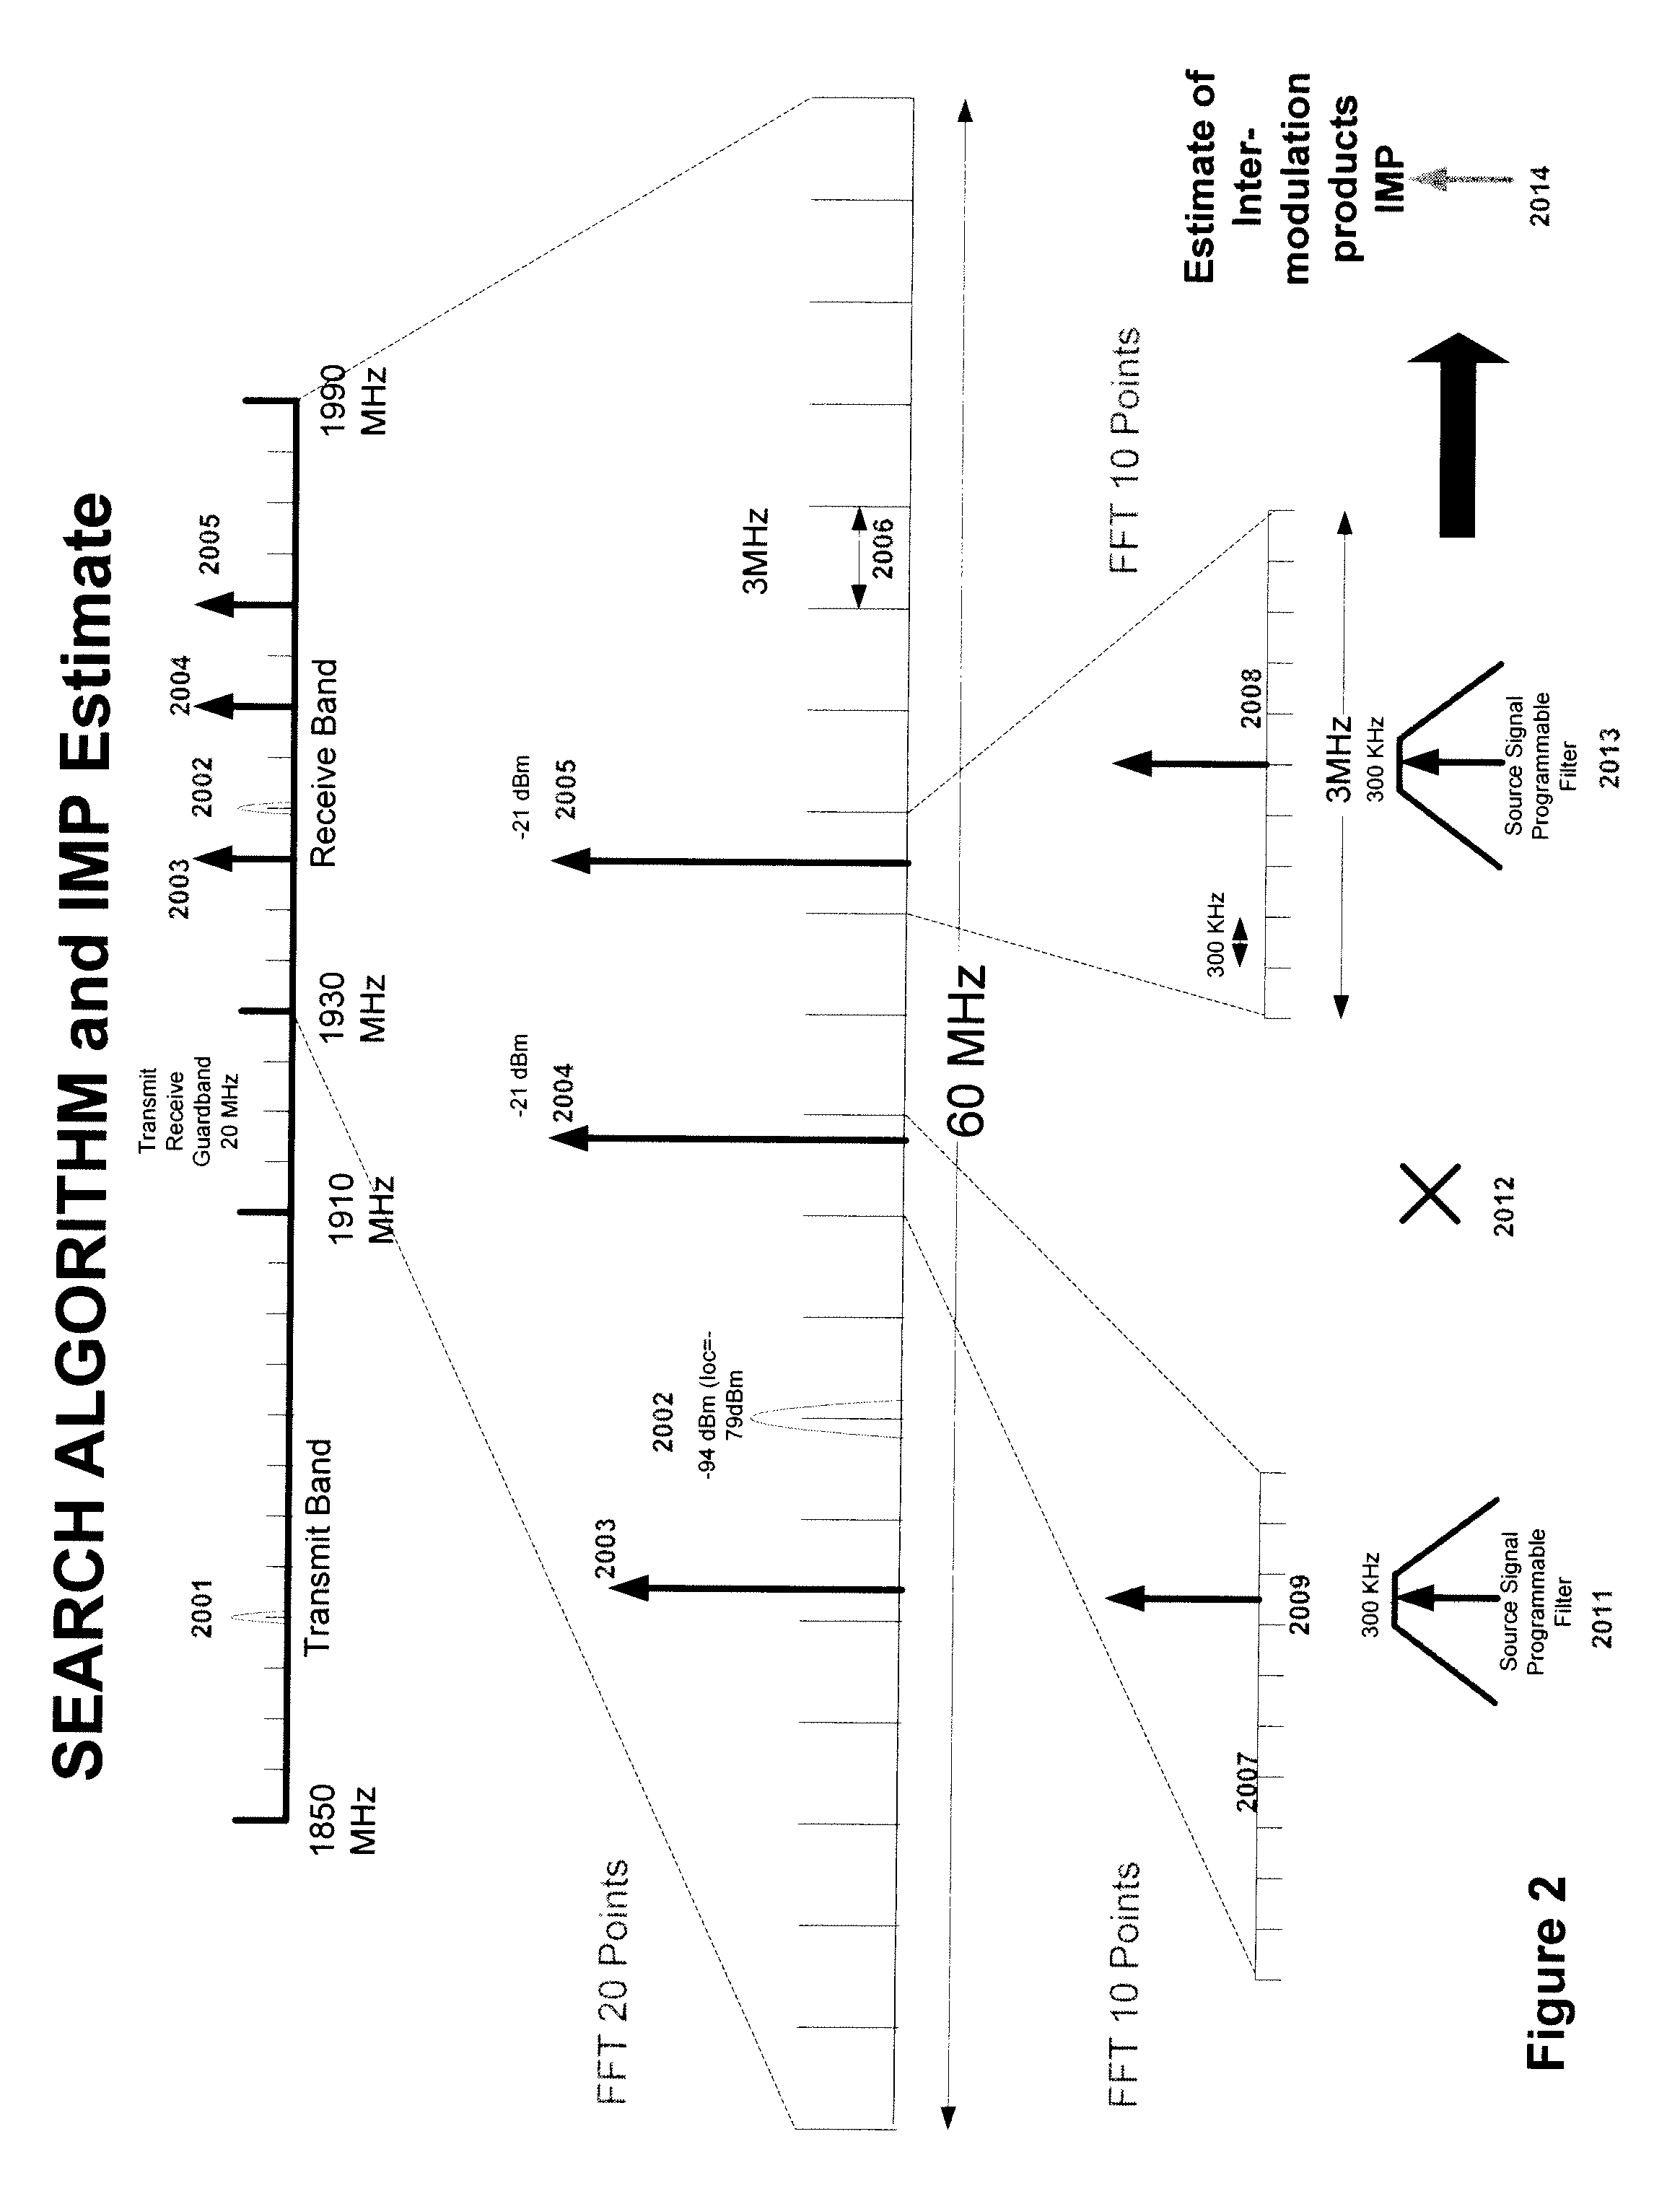 Multi-mode - multi-band direct conversion receiver with complex i and q channel interference mitigation processing for cancellation of intermodulation products